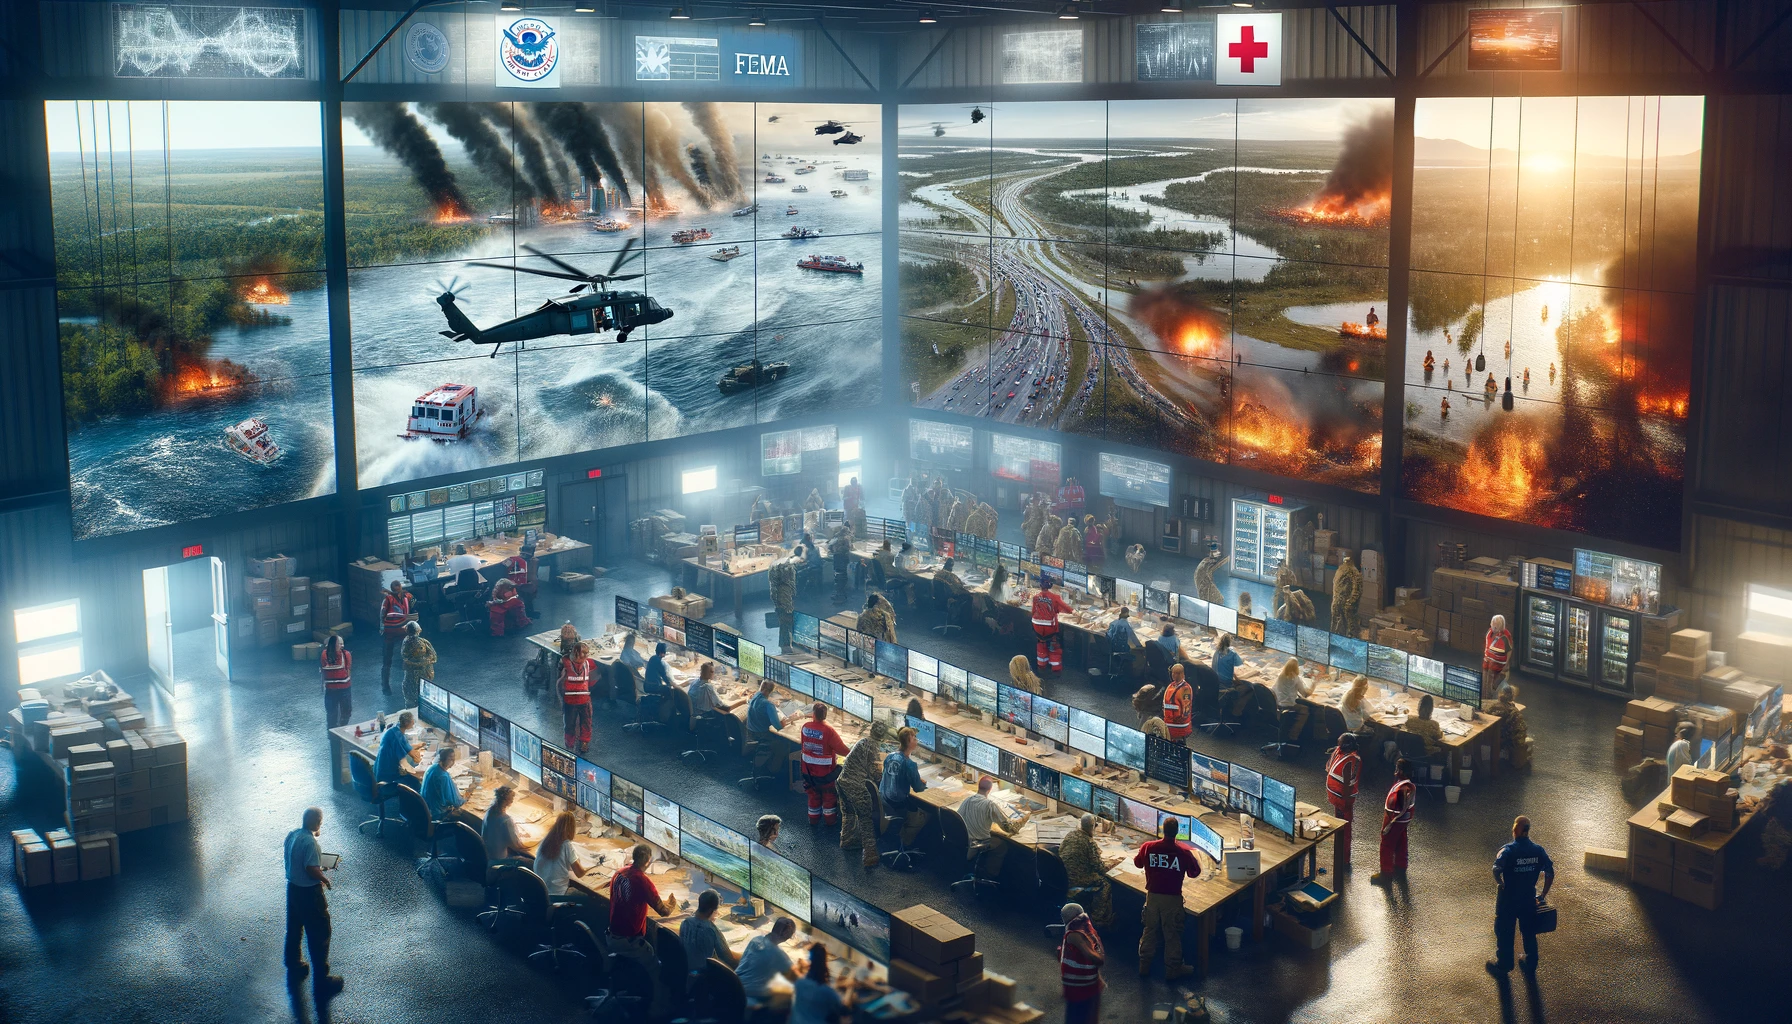 Impactful image illustrating FEMA and Red Cross roles in disaster response, with FEMA officials in a high-tech command center and Red Cross volunteers providing aid on the ground. The split-scene shows urban and rural disaster relief, featuring rescue operations for floods, wildfires, and earthquakes. The backdrop of diverse communities uniting in recovery embodies hope and resilience, celebrating the critical, far-reaching efforts of FEMA and the Red Cross in times of crisis